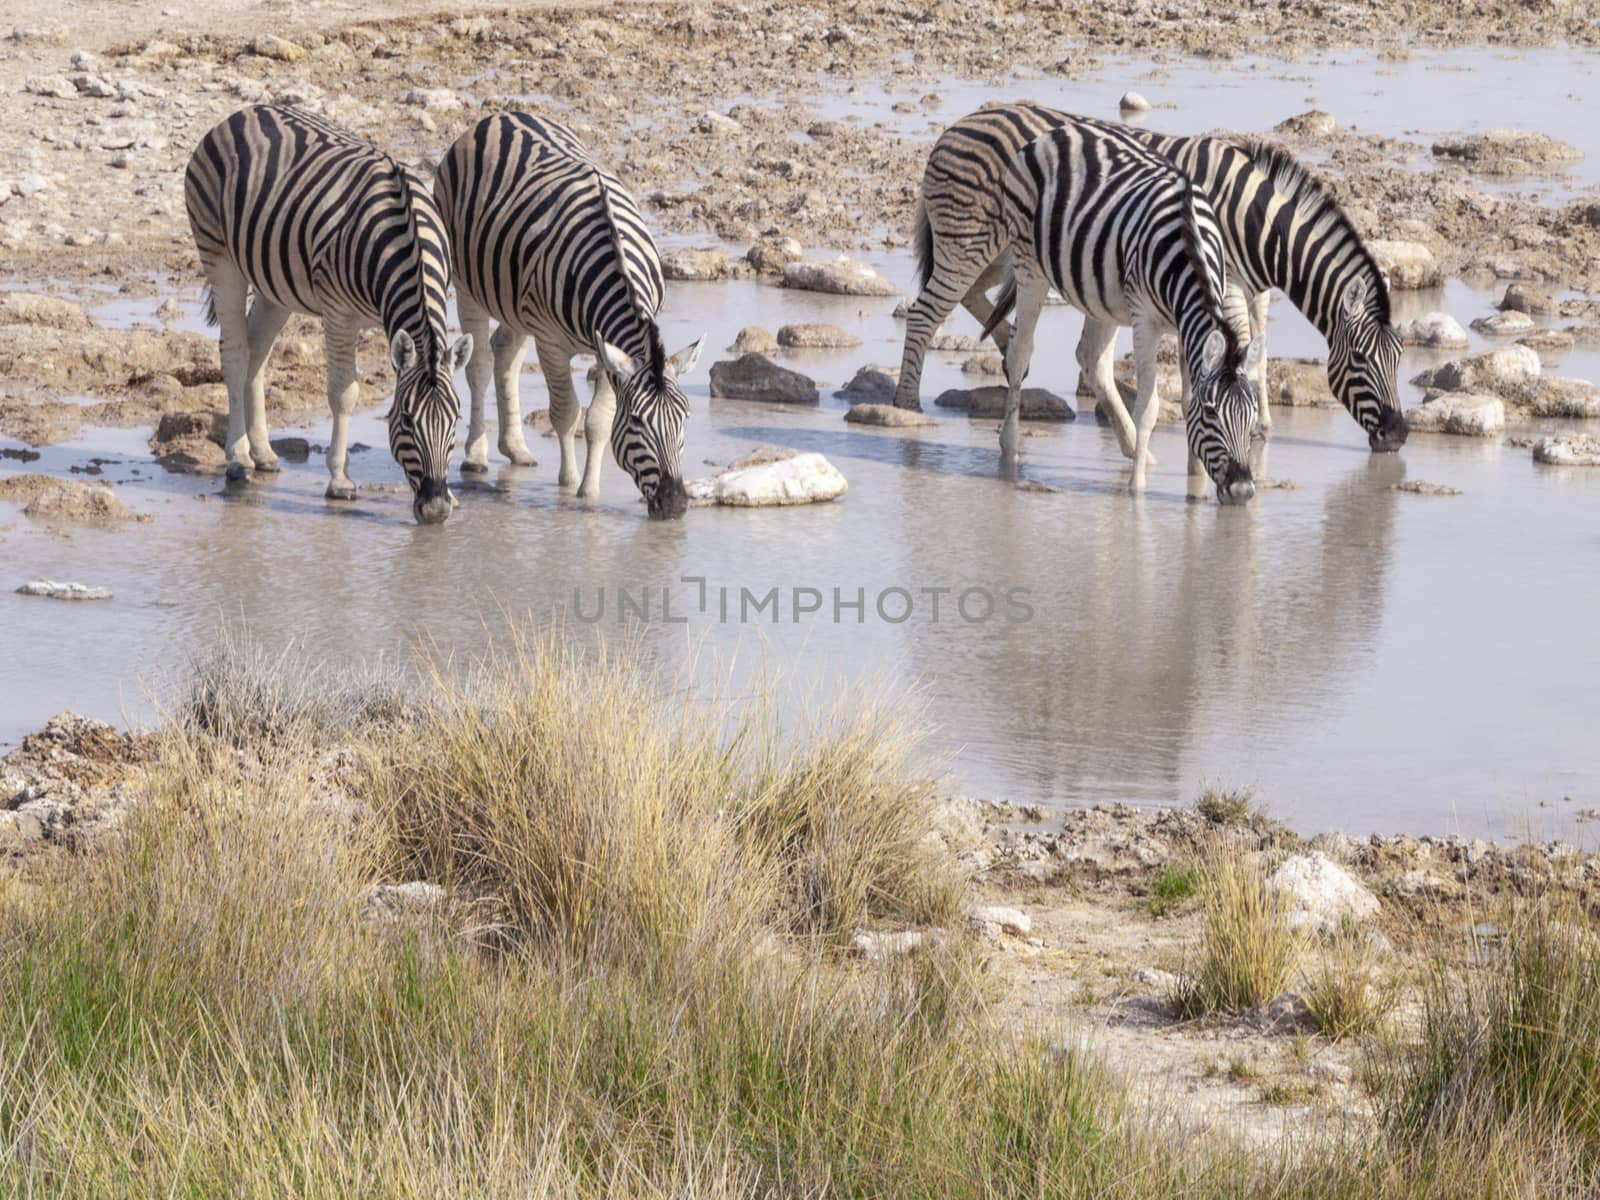 Zebras in the Etosha National Park in Namibia in Africa. by maramade